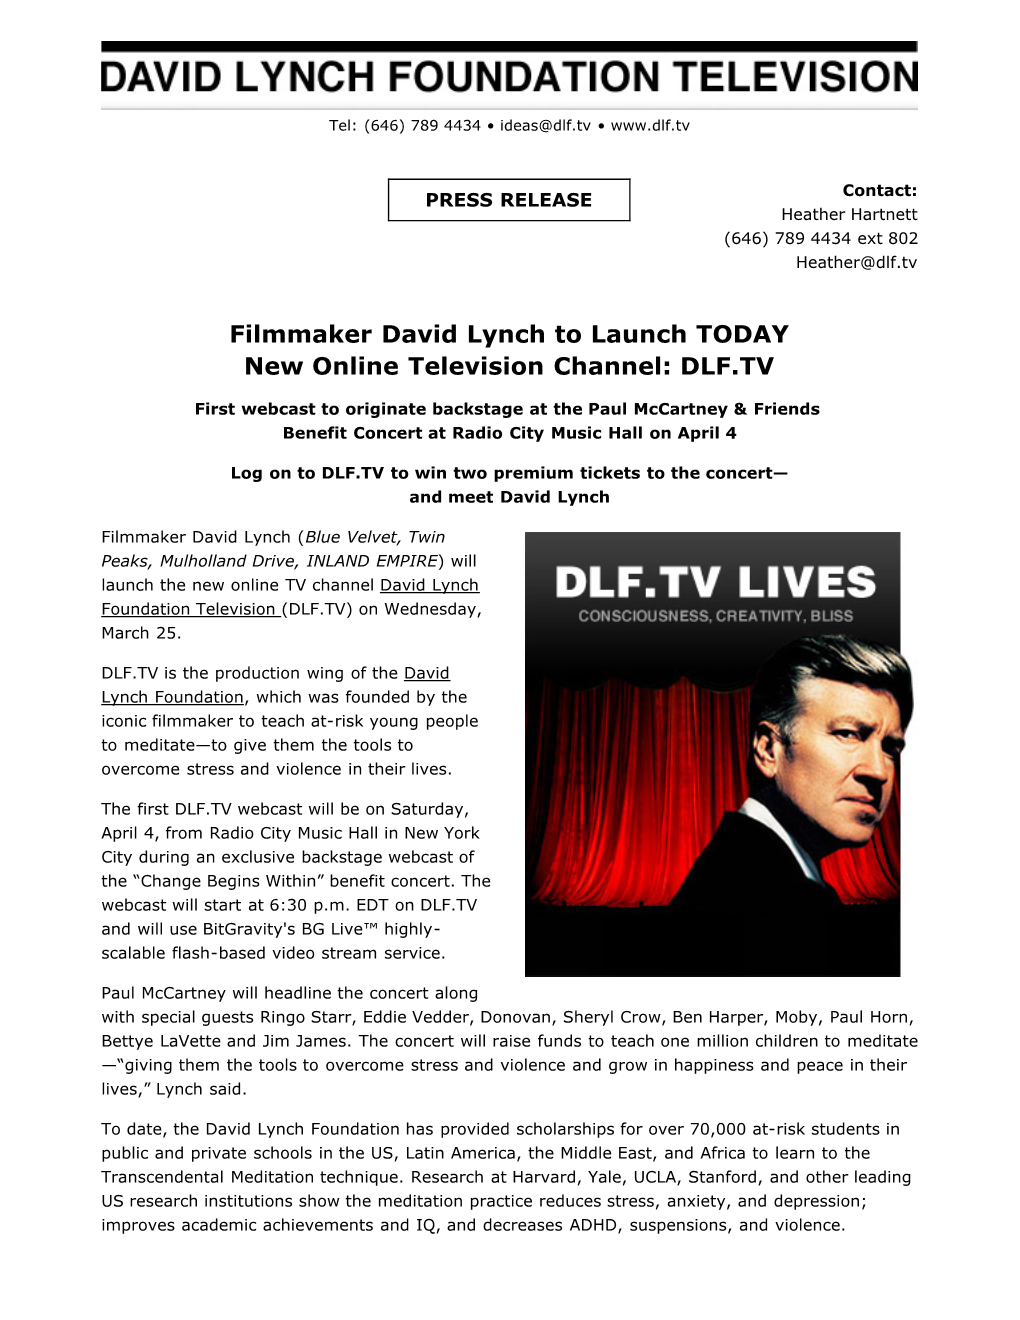 Filmmaker David Lynch to Launch TODAY New Online Television Channel: DLF.TV